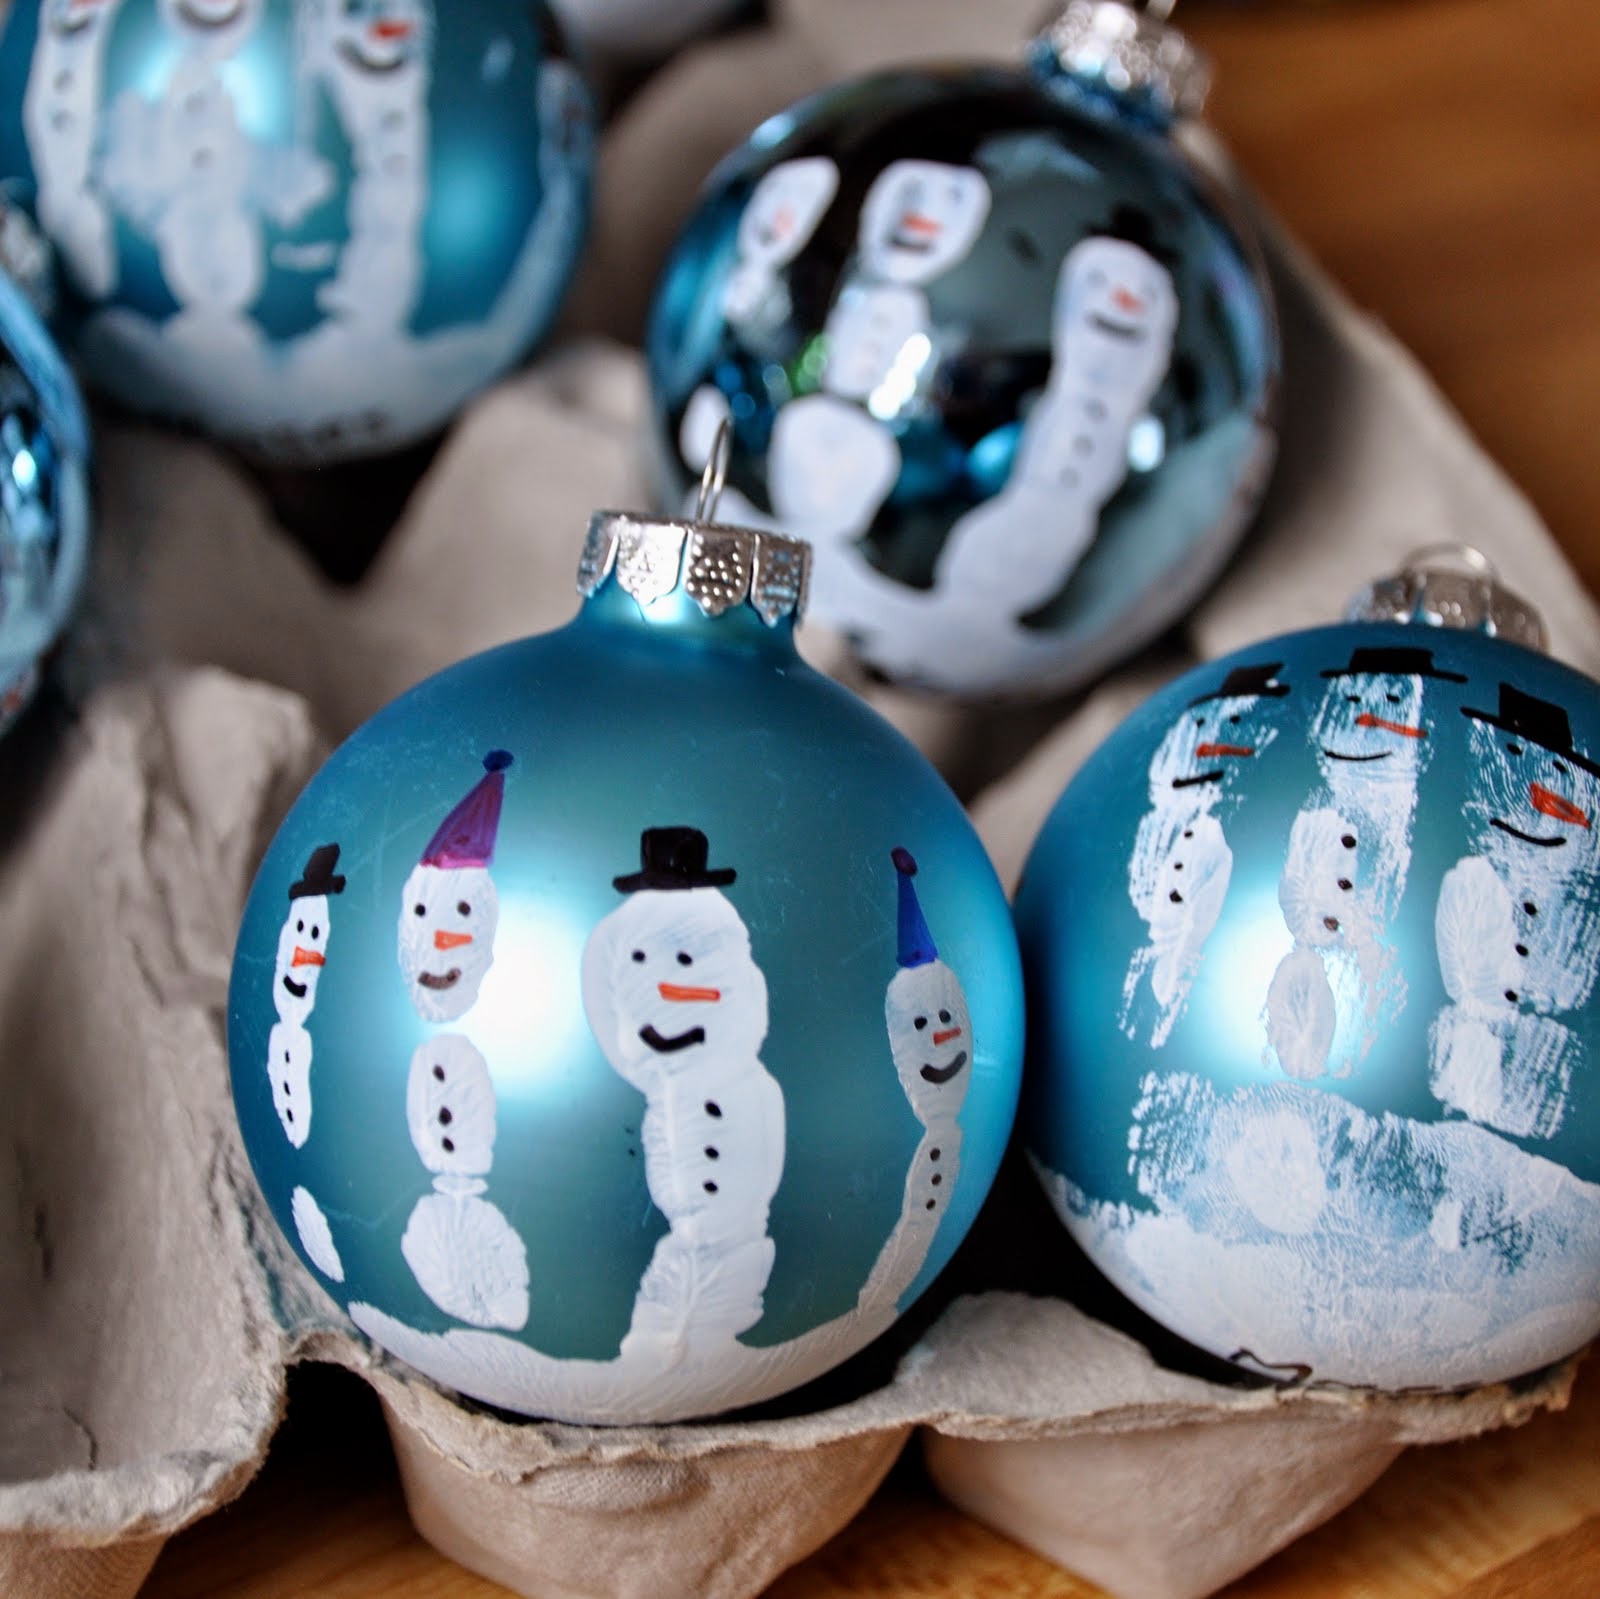 30 Homemade Ornaments for the Kids